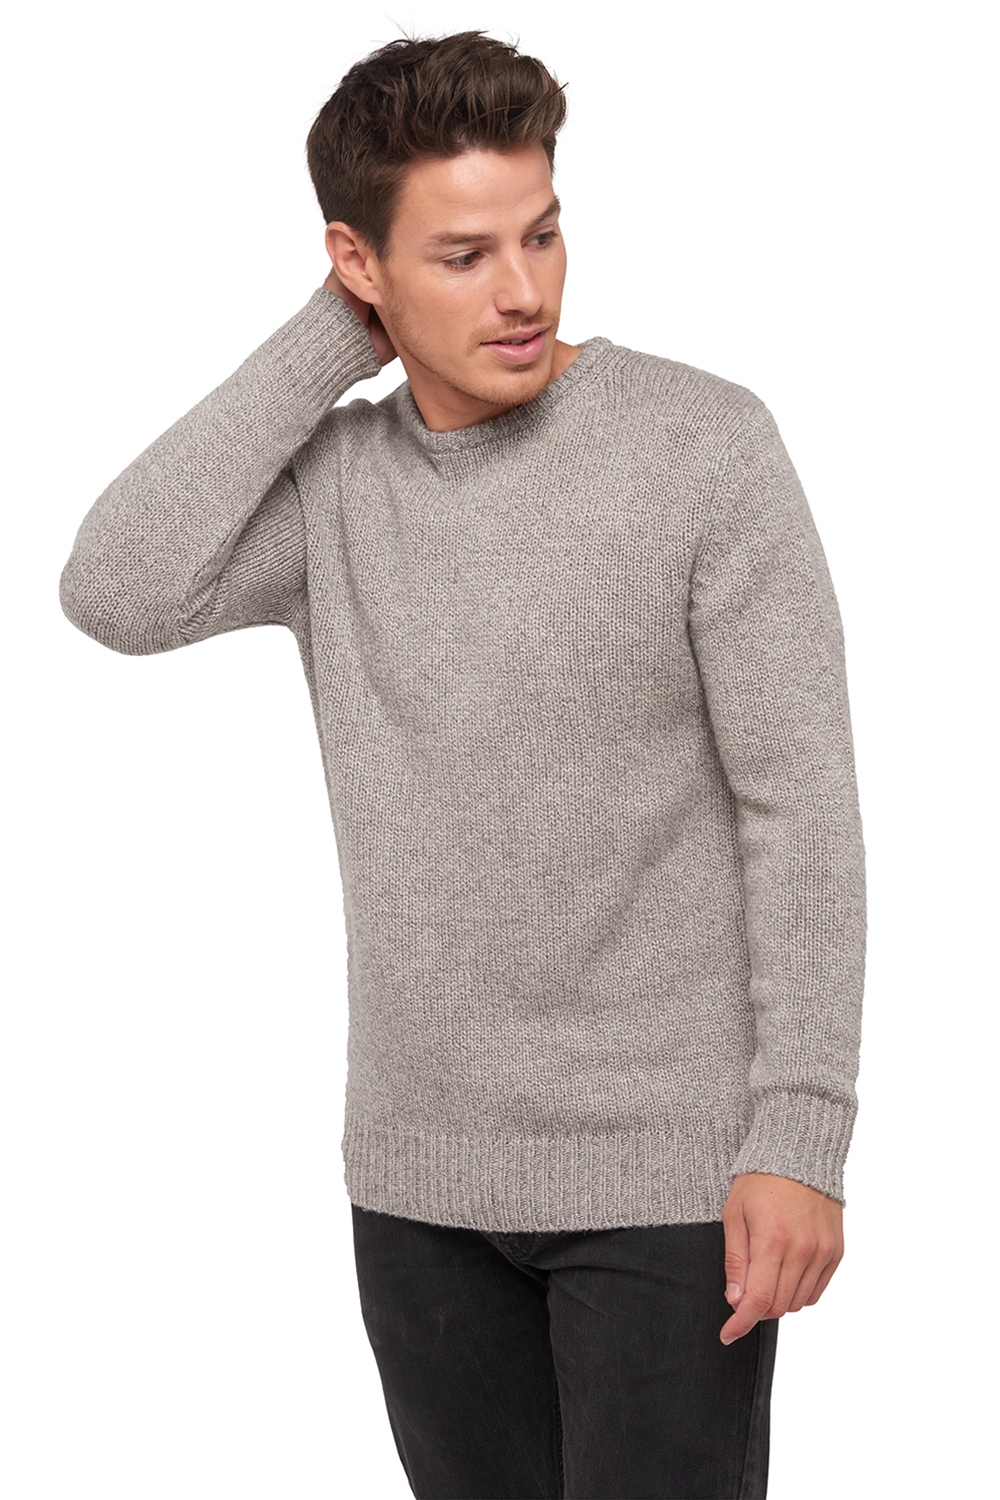 Chameau pull homme col rond cole pierre s